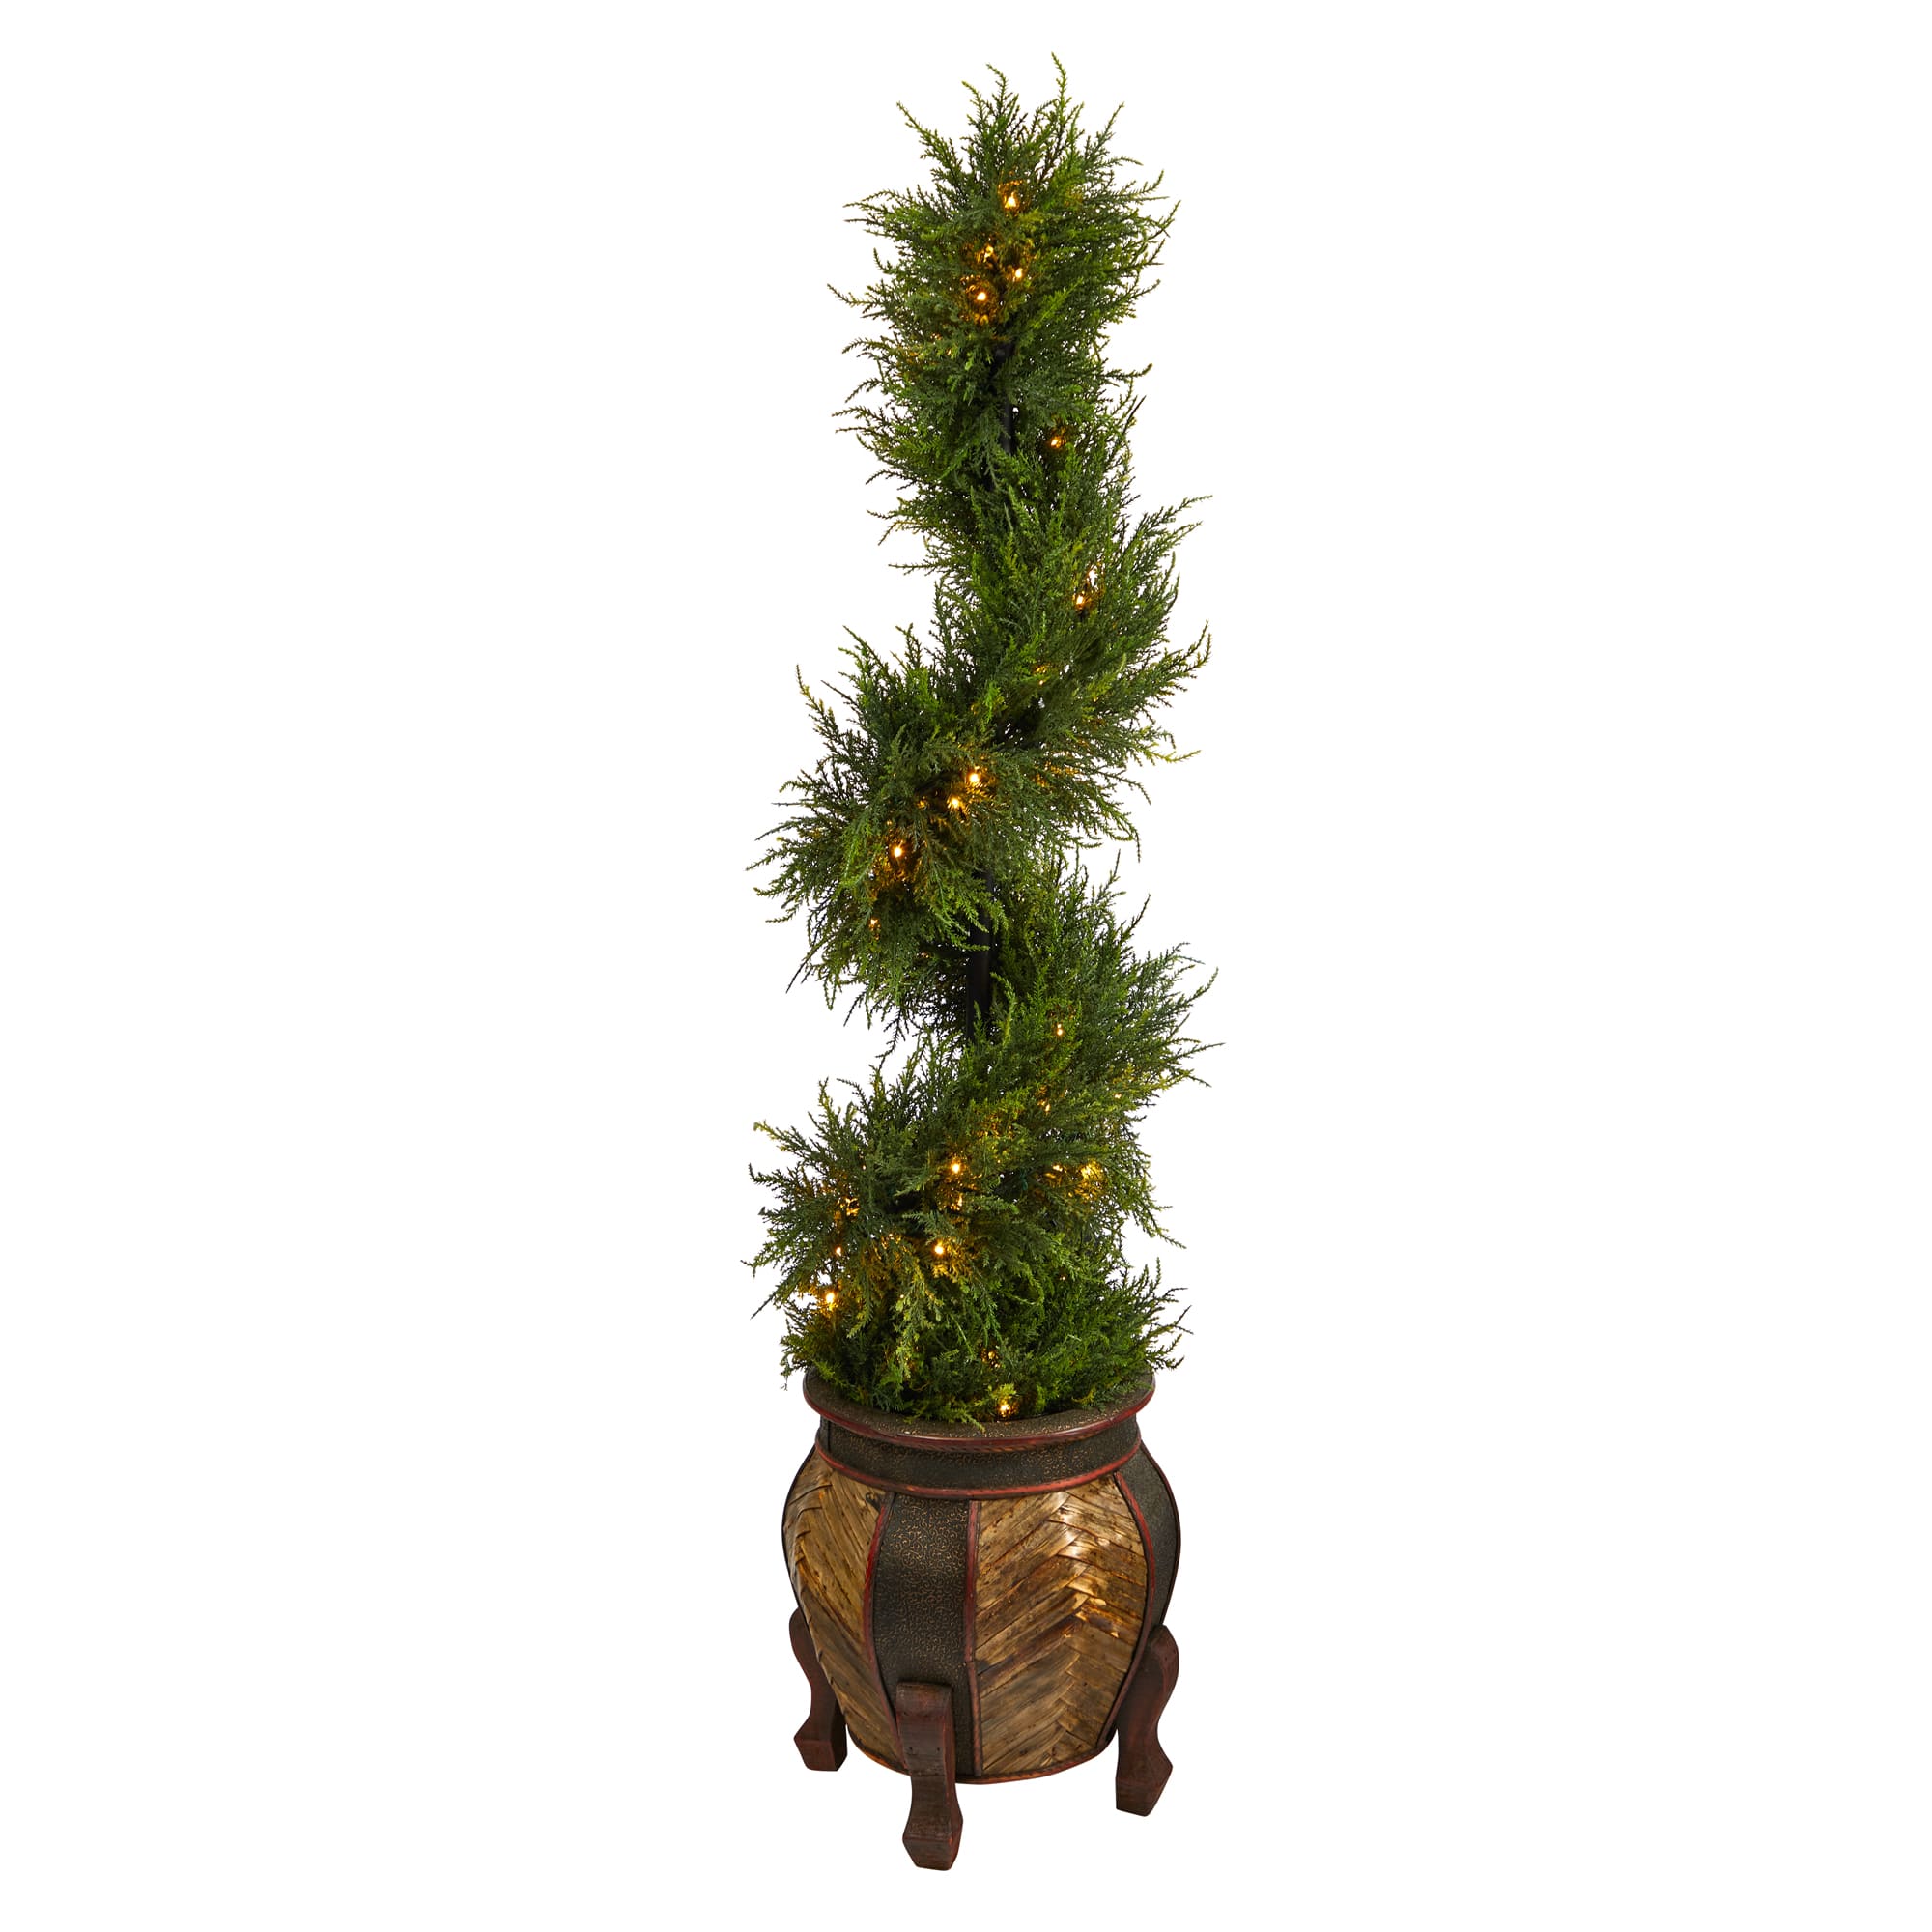 4.5ft. Spiral Cypress Artificial Tree in Decorative Planter with 80 Clear LED Lights UV Resistant (Indoor/Outdoor) Michaels